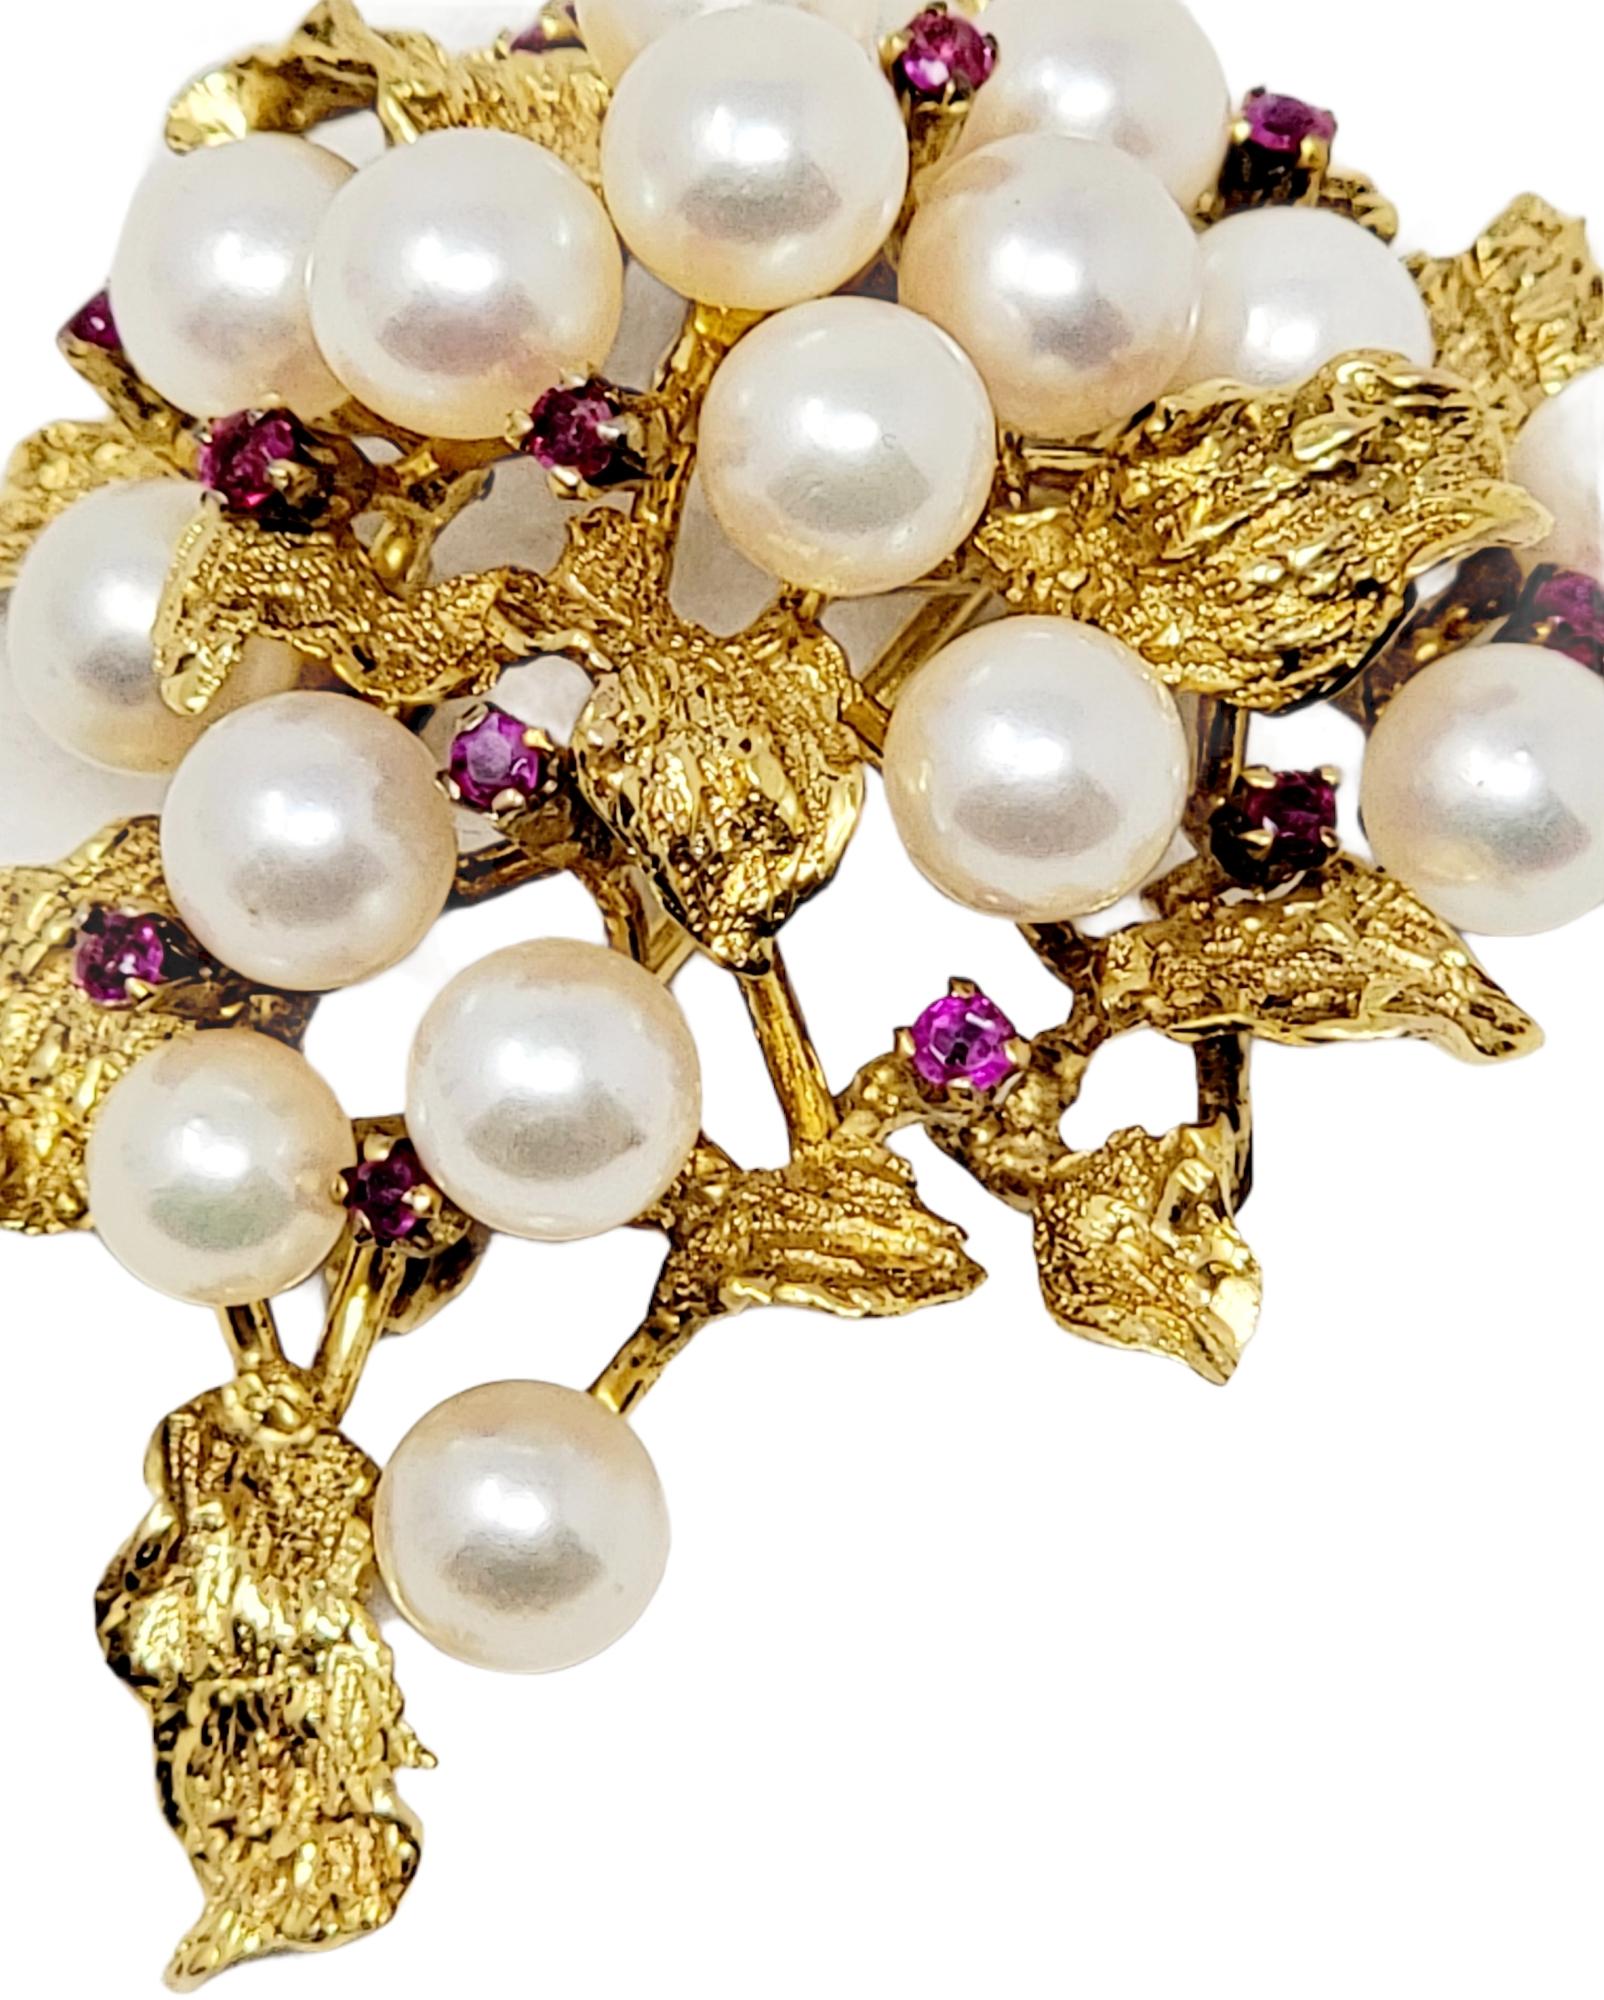 Women's Vintage 14 Karat Yellow Gold Large Leaf Cluster Brooch with Pearls and Rubies For Sale